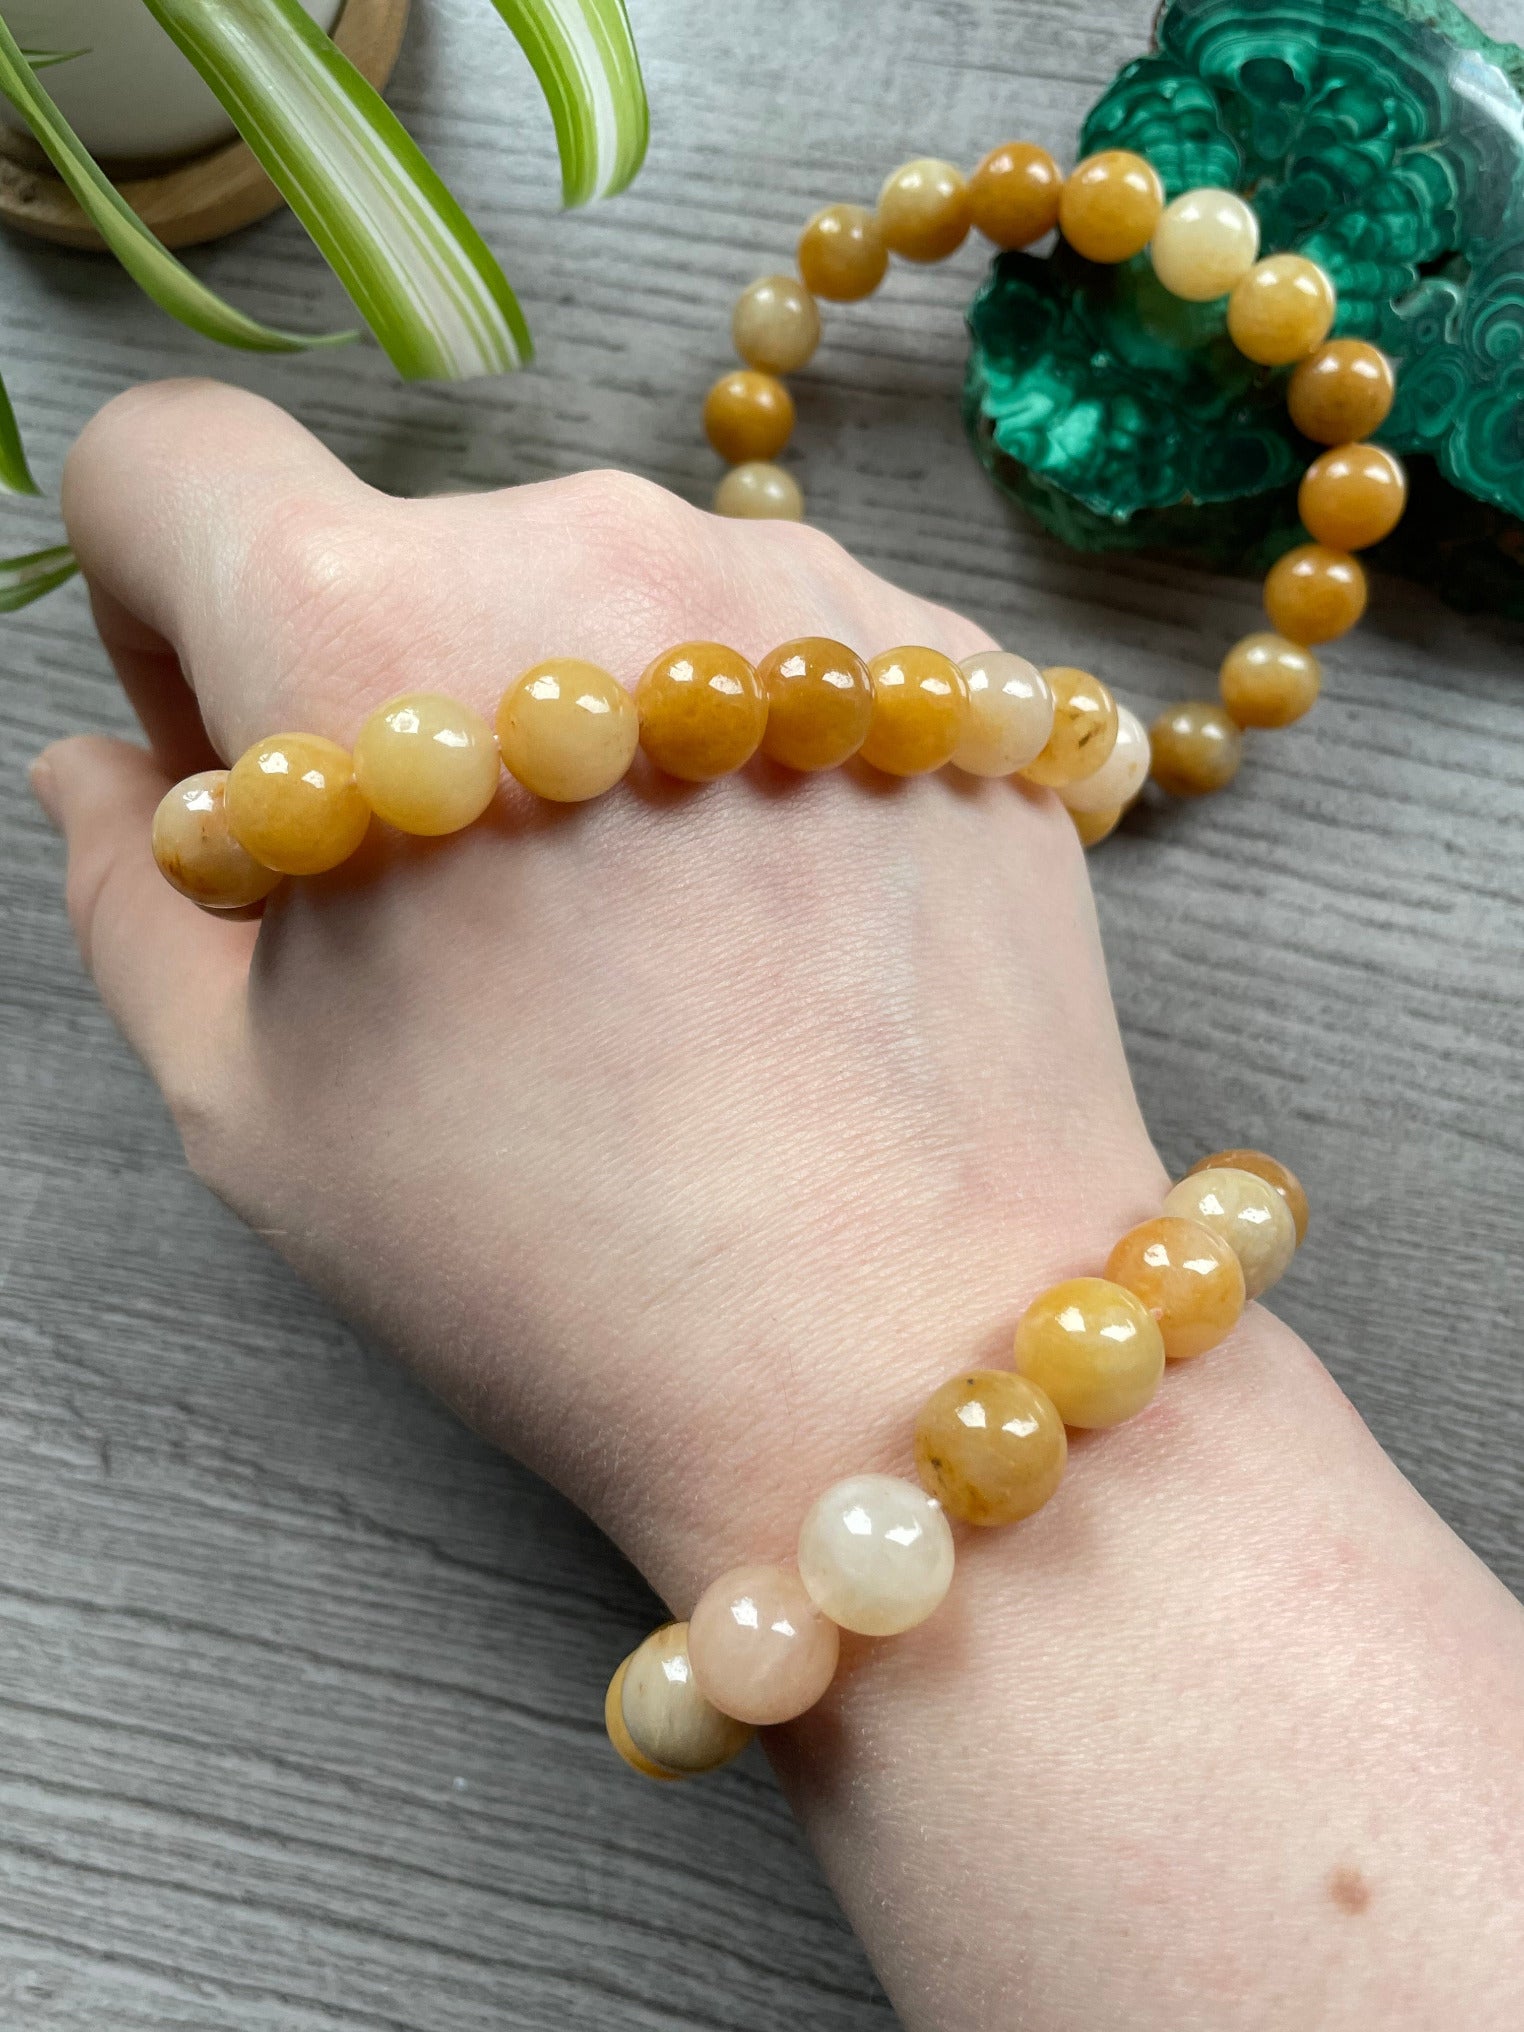 Pictured is a yellow jade bead bracelet.